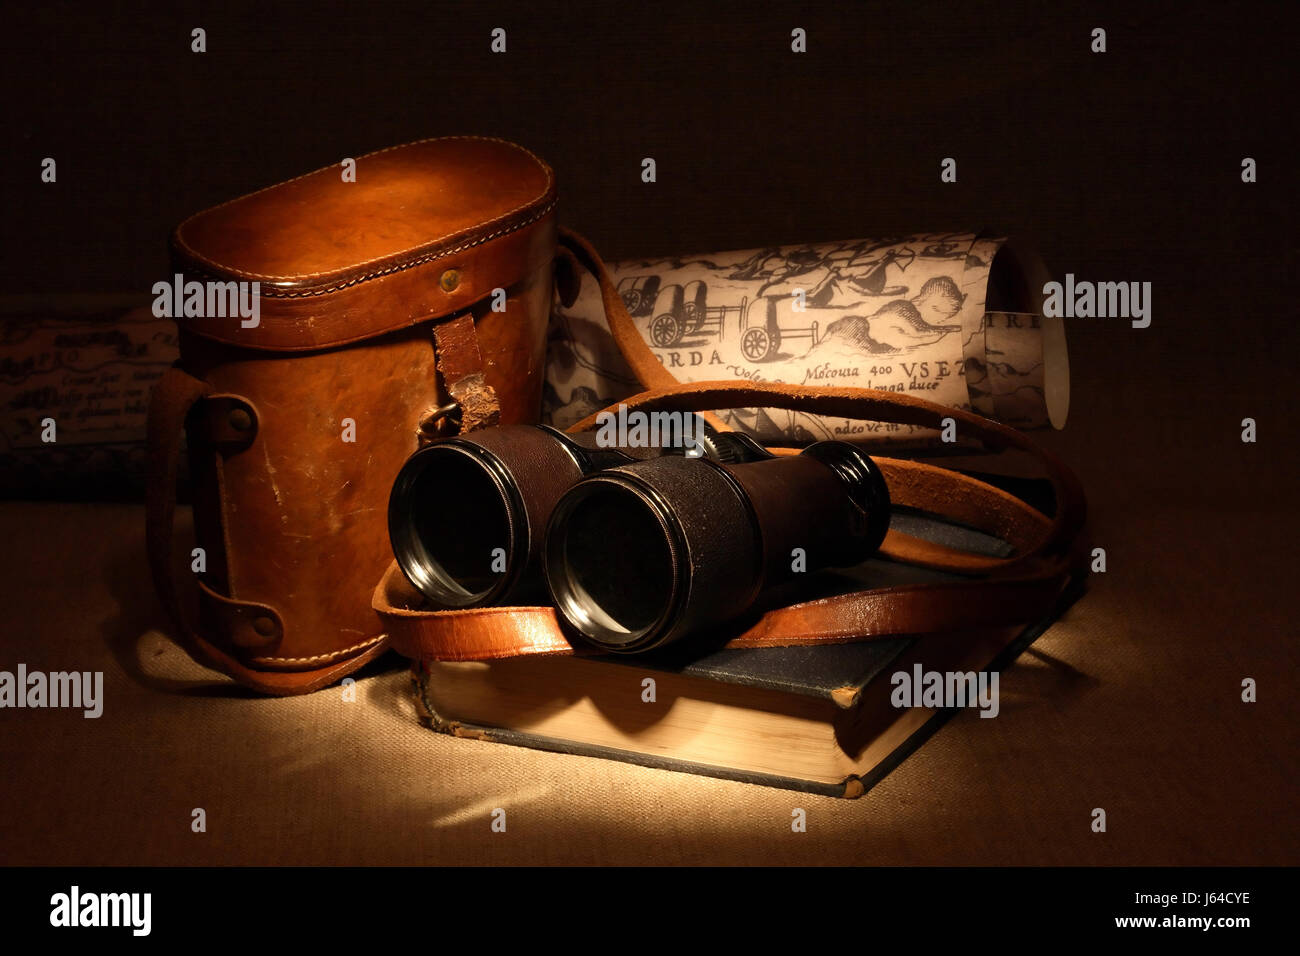 Still life with old binoculars on ancient book near leather case Stock Photo